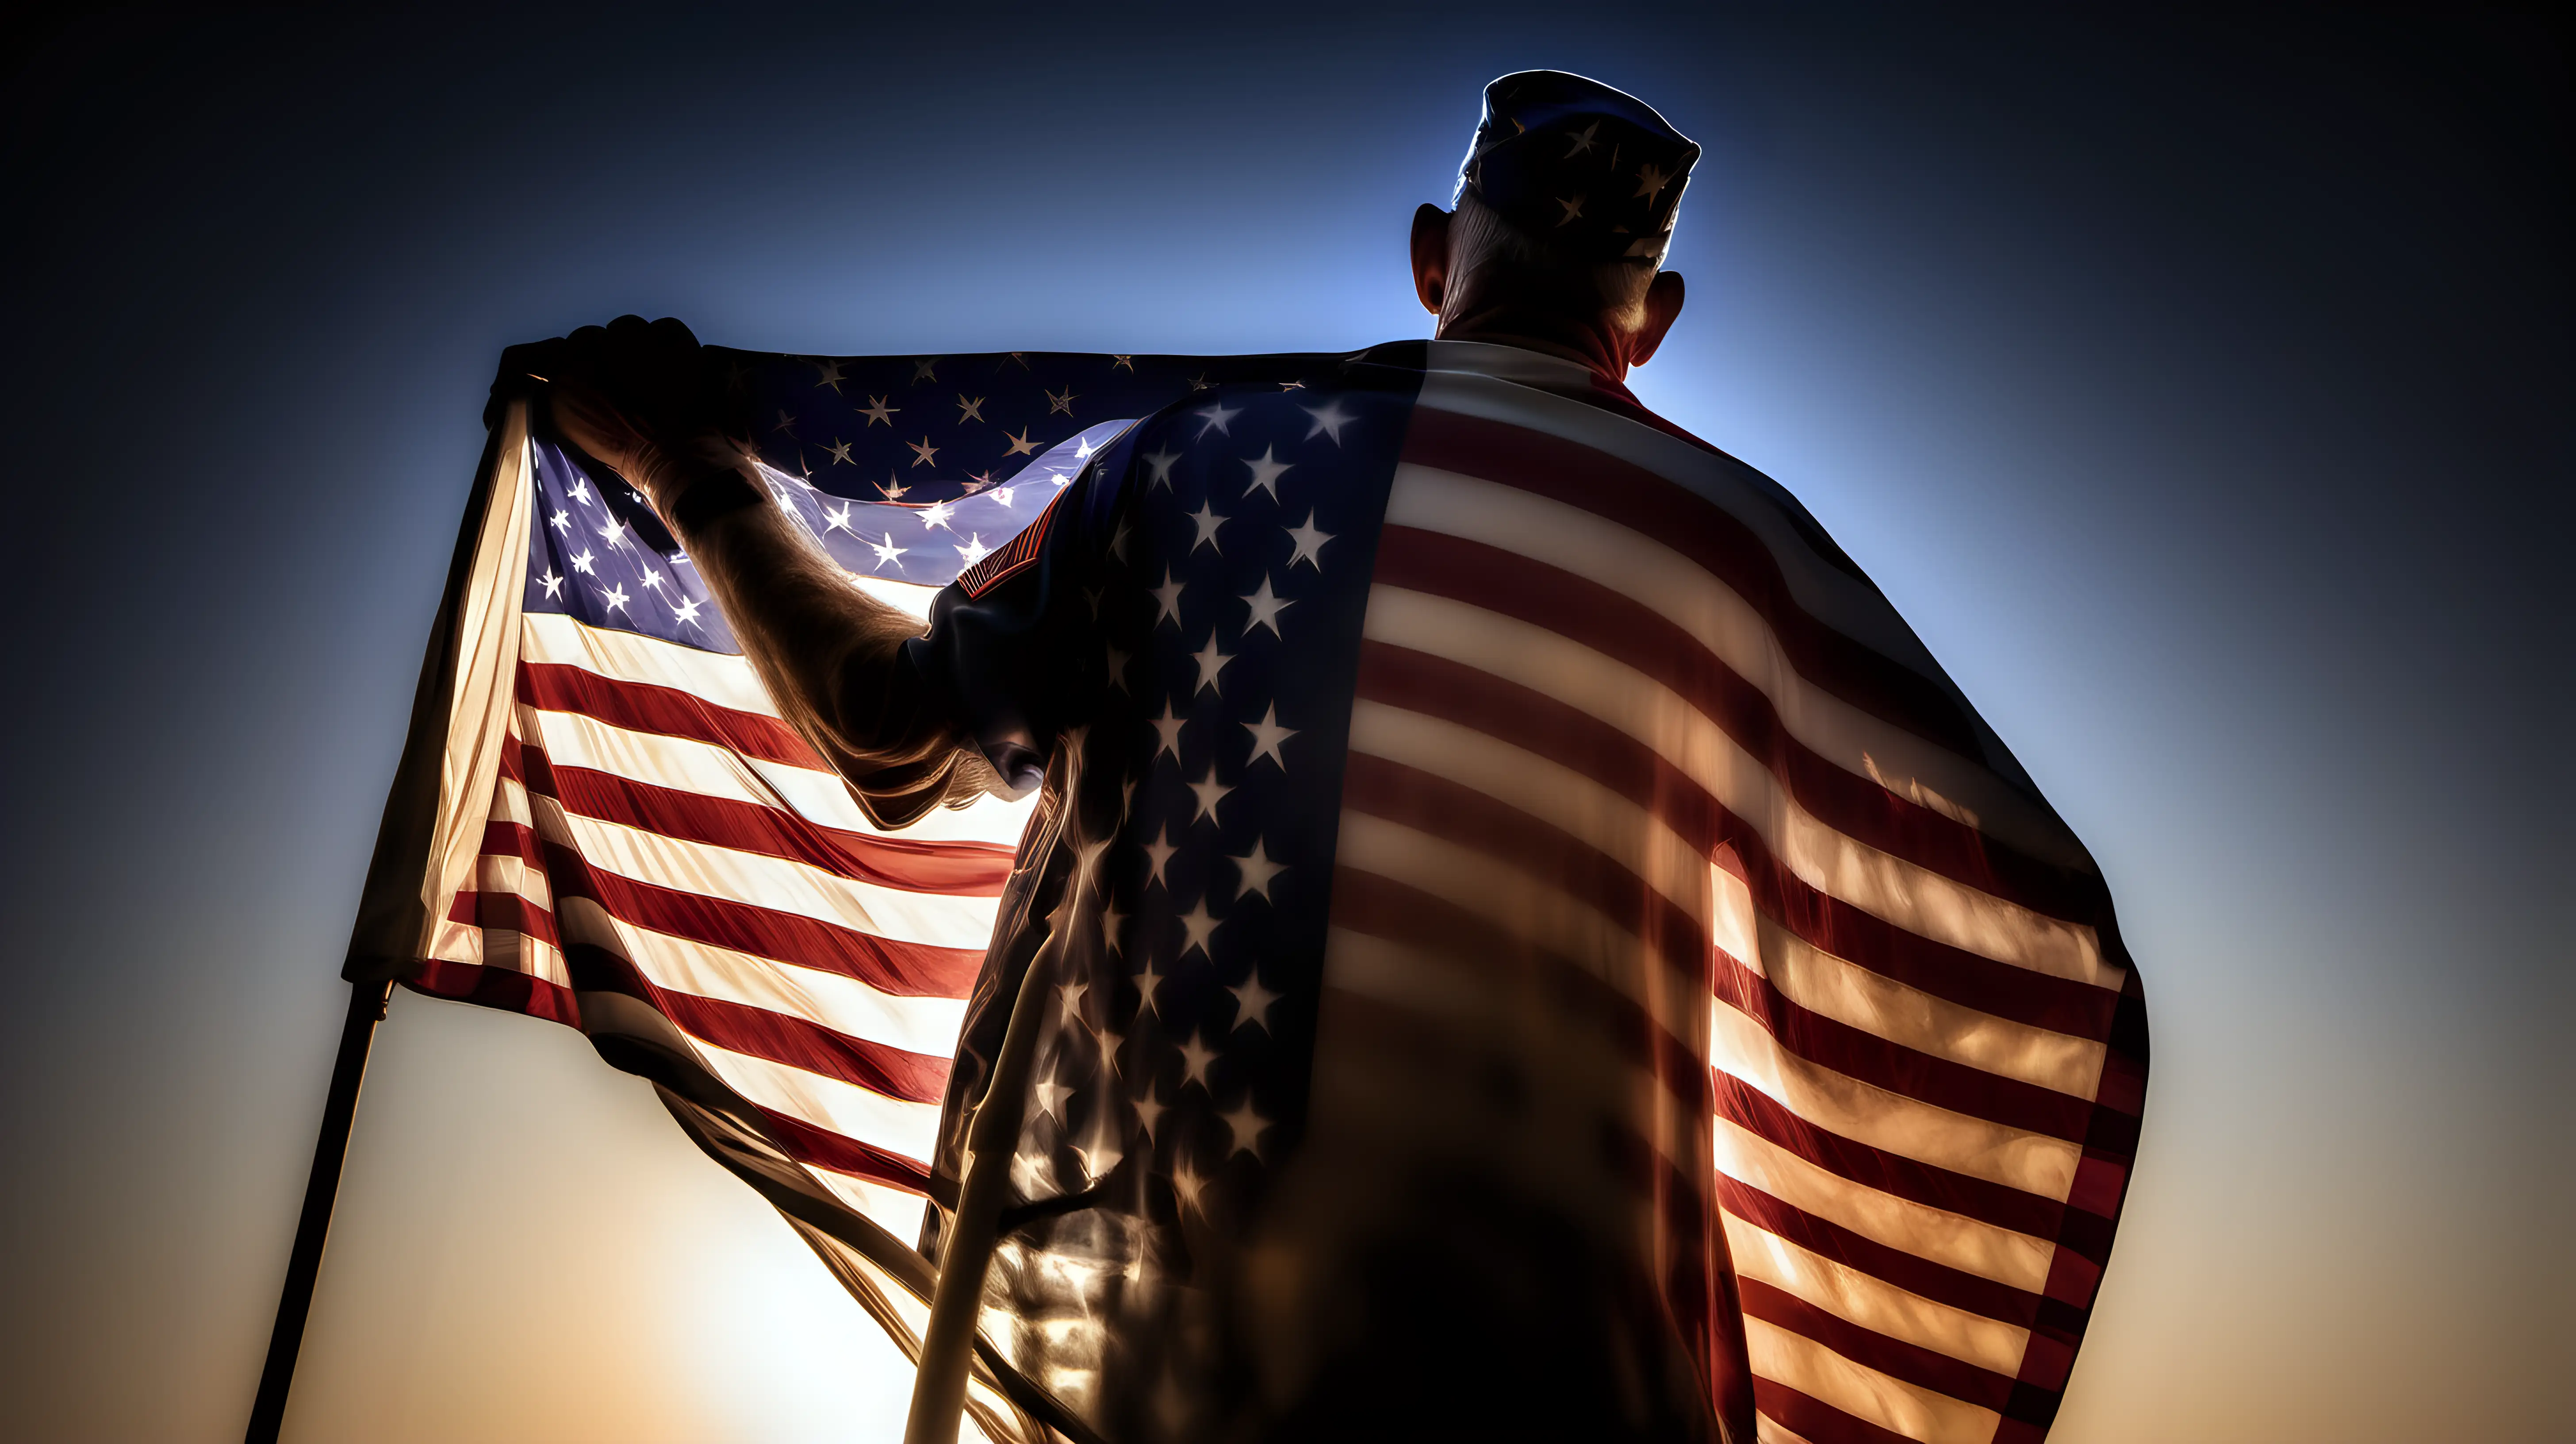 A veteran clutching a radiant American flag close to their chest, the brilliance of its glow reflecting the unwavering commitment and sacrifices made in service to their nation.